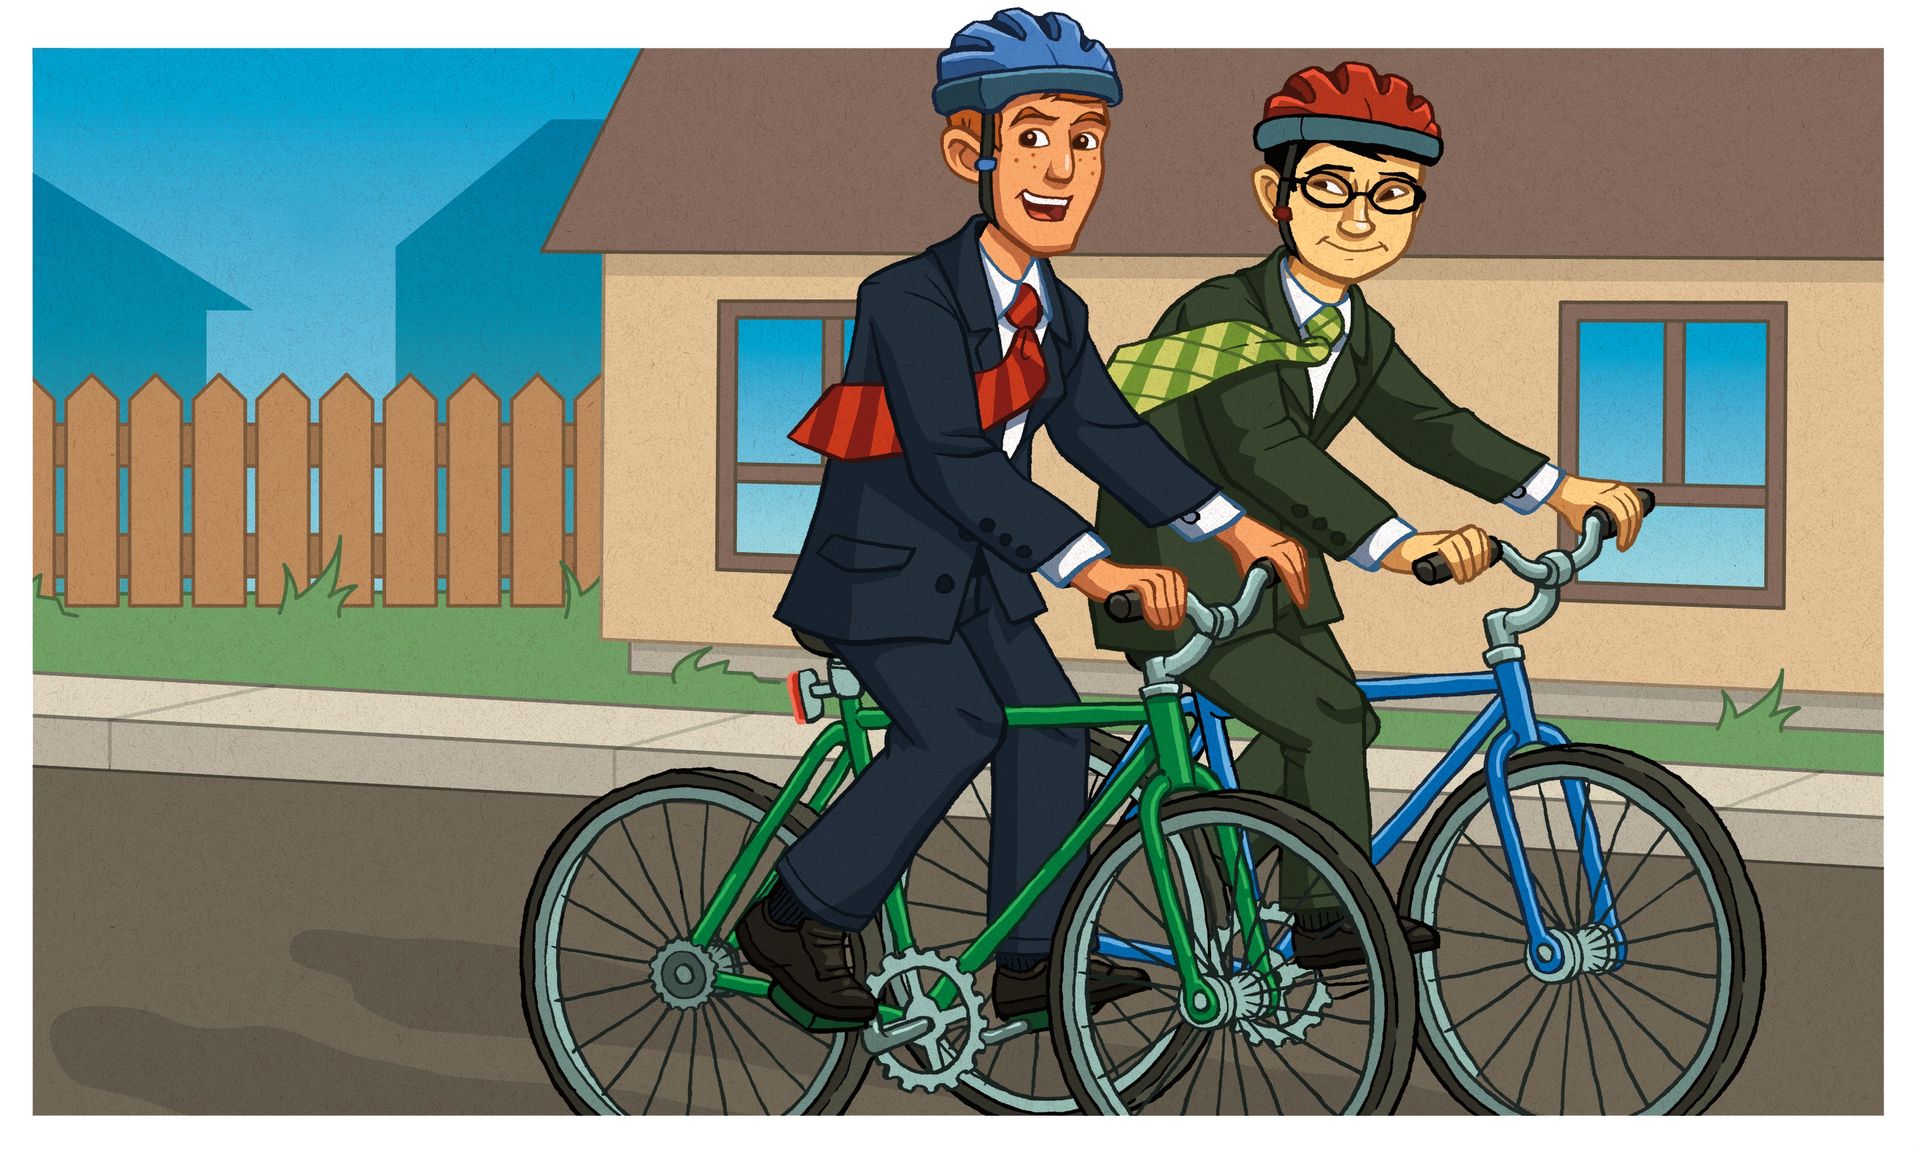 Two missionaries ride bikes down a street.